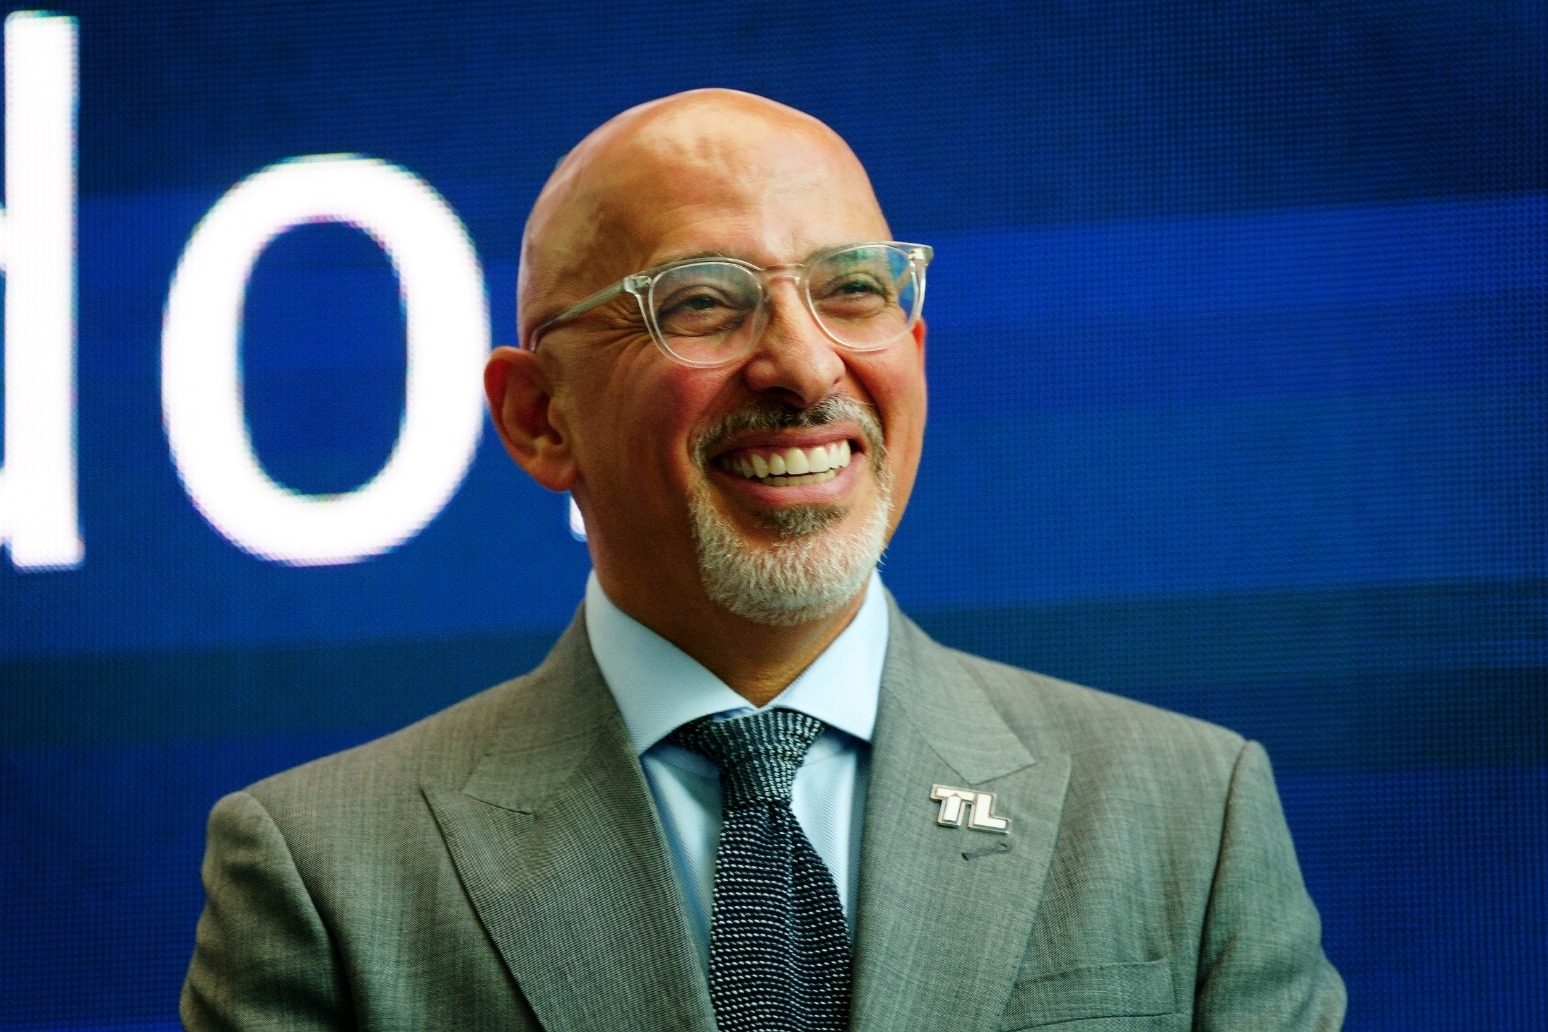 Teachers strike would be unfair after pandemic disruption Nadhim Zahawi says